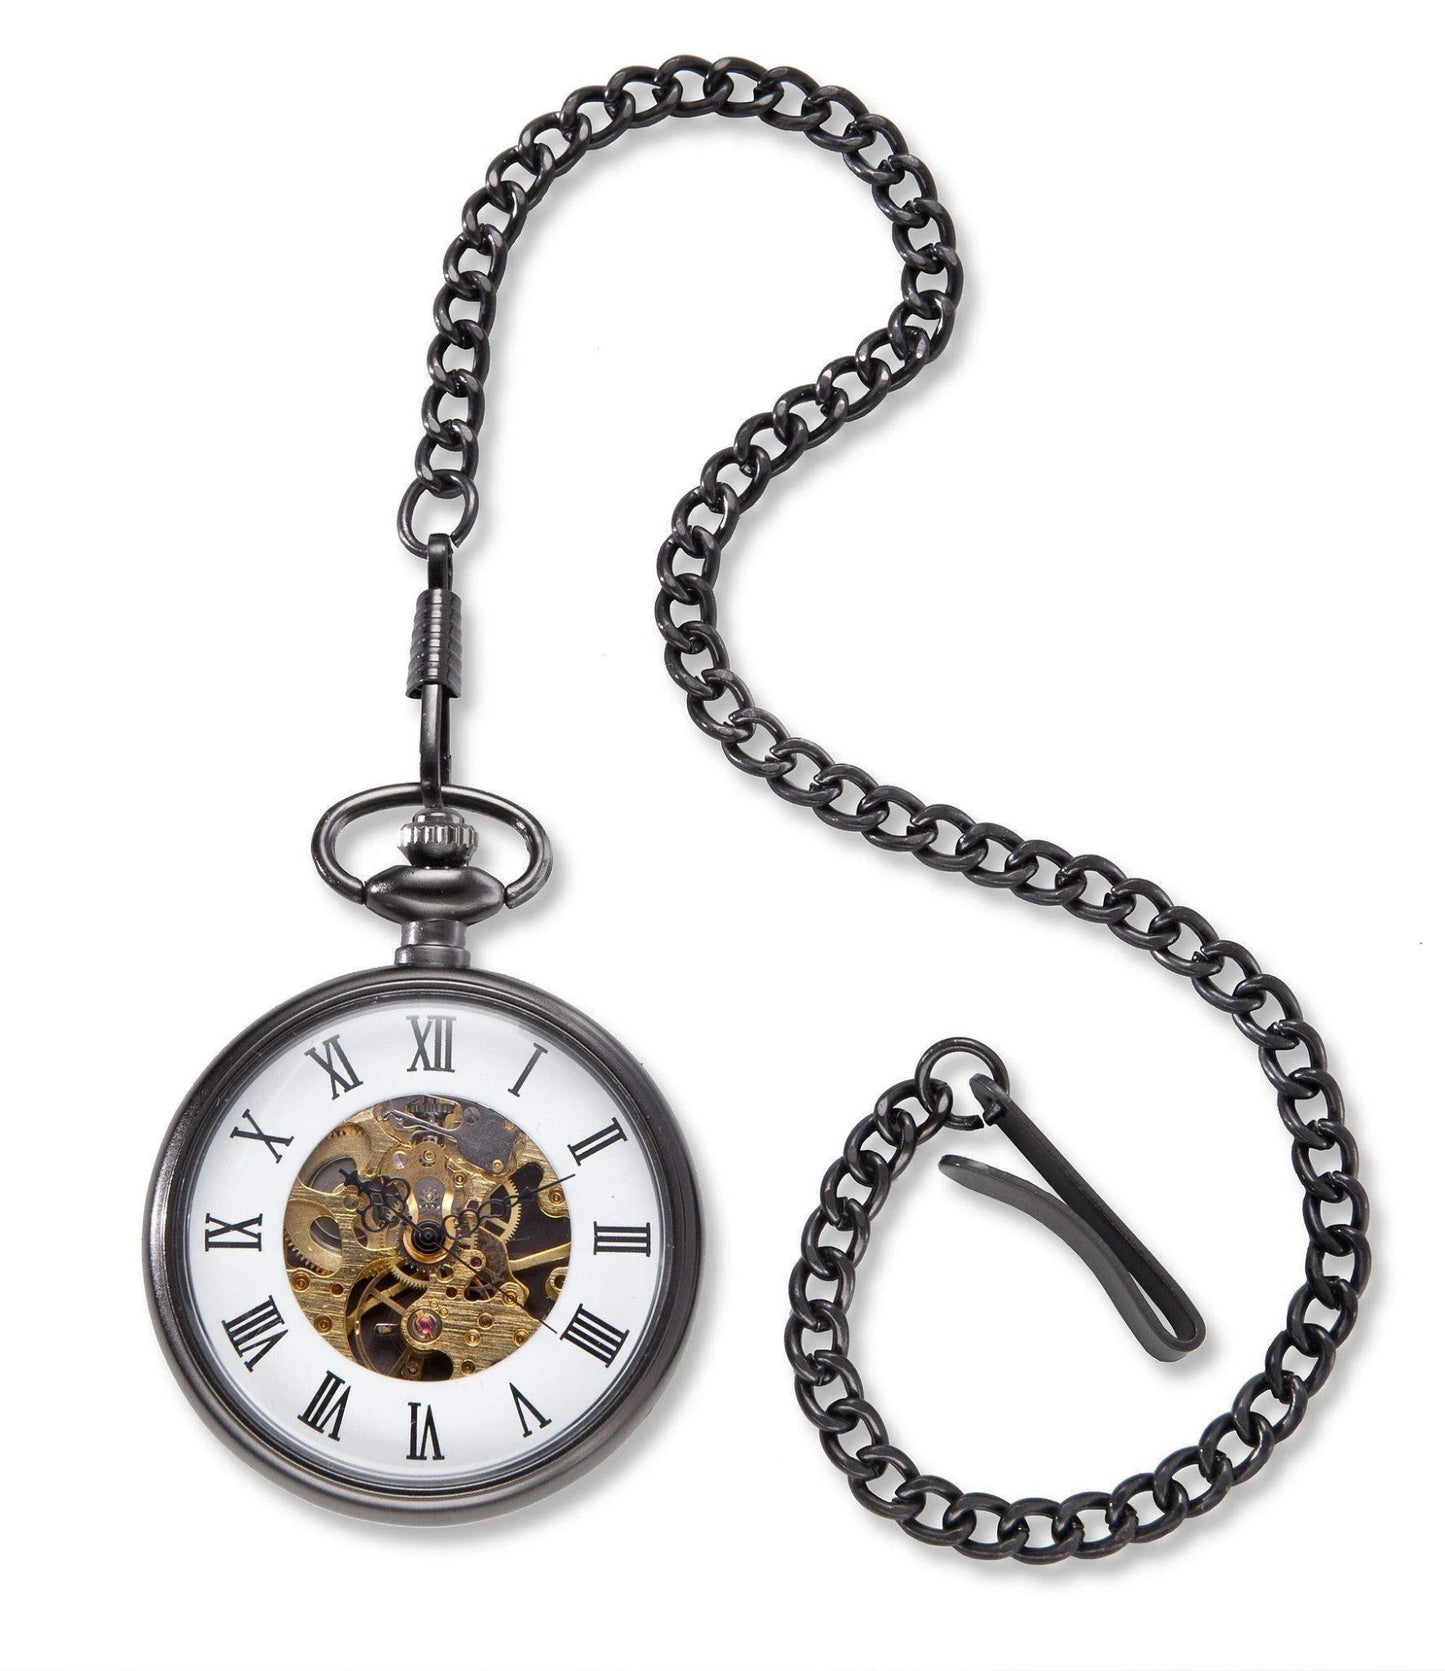 The Dad You Didn't Have To Be Pocket Watch